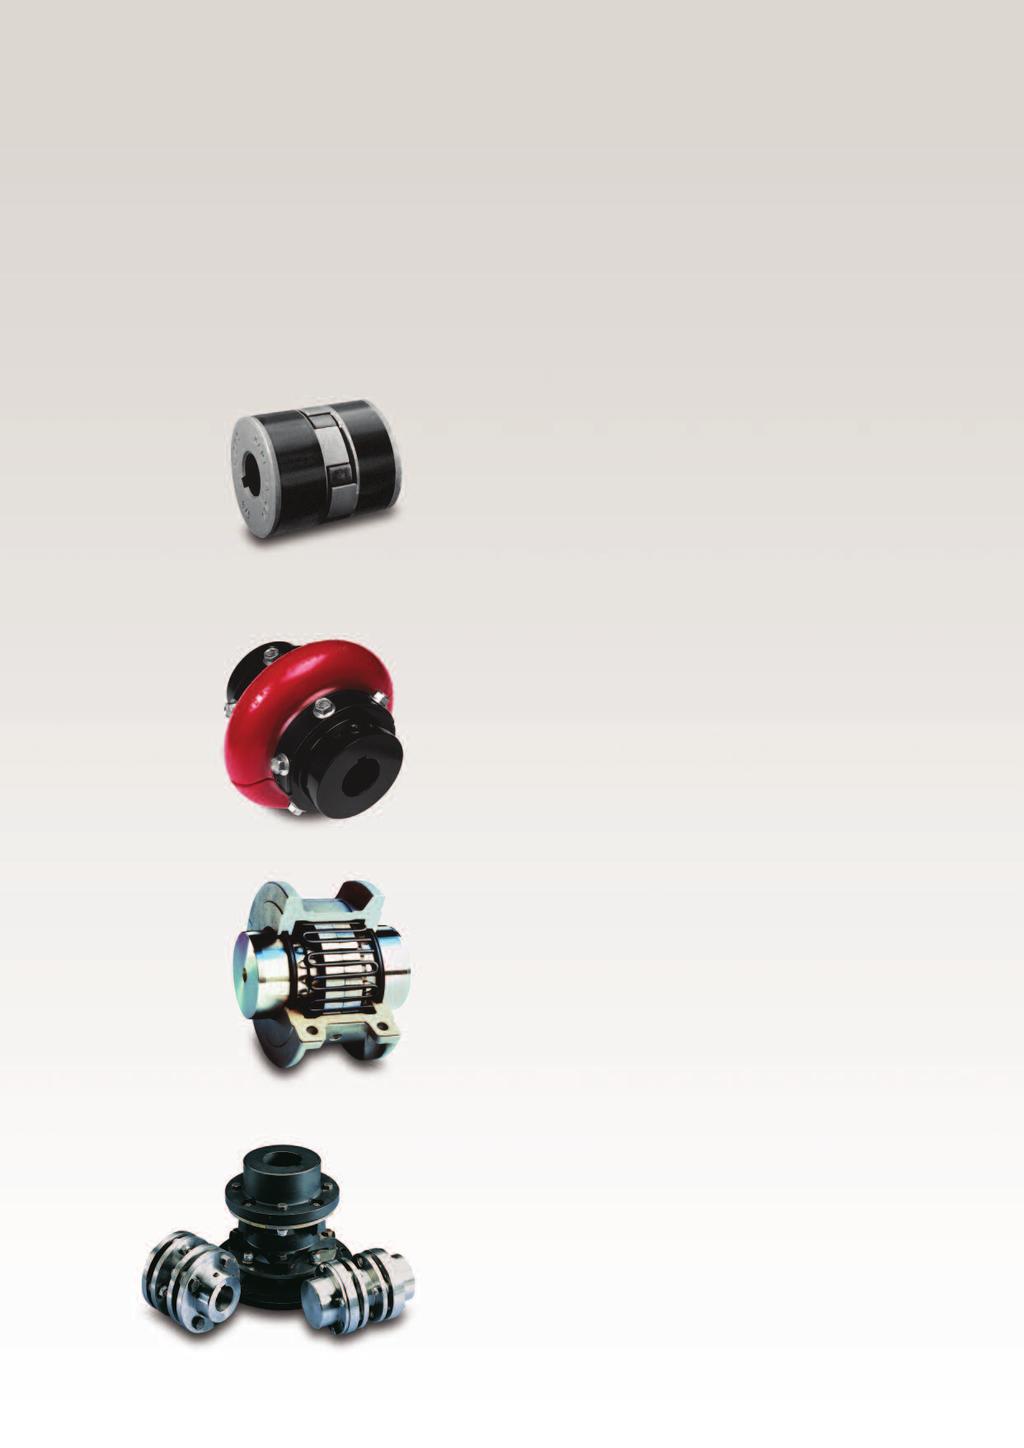 TB Wood s offers a wide range of couplings for industrial applications For over 70 years, TB Wood s has been designing and manufacturing innovative coupling solutions to meet the requirements for a